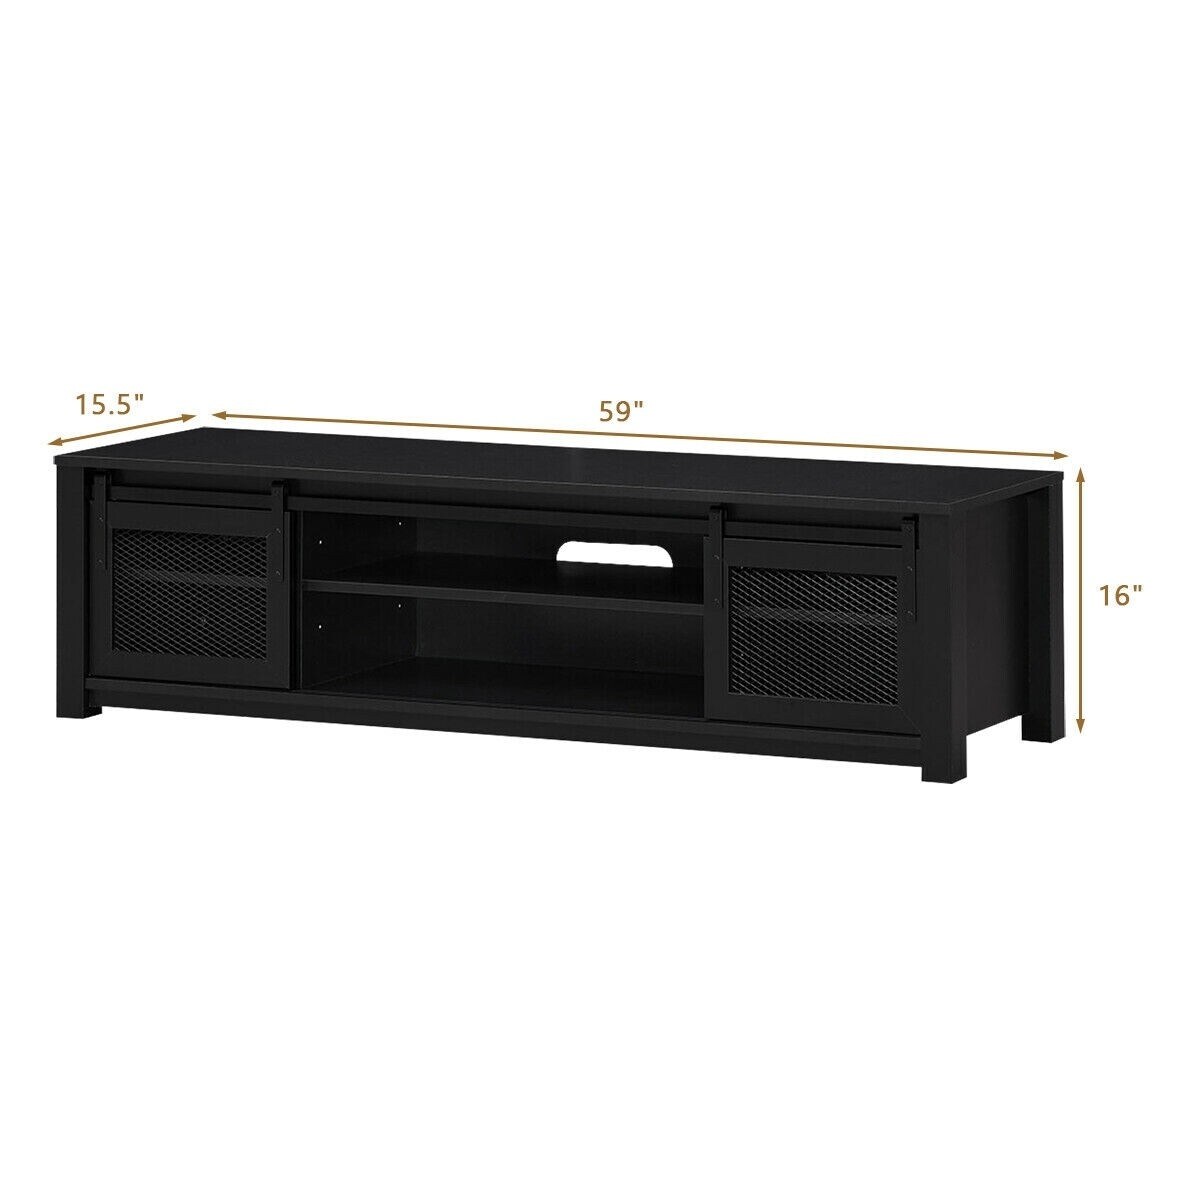 TV Stand Entertainment Center for TV's up to 65" - 59" x 15.5" x 16"(L x W x H)